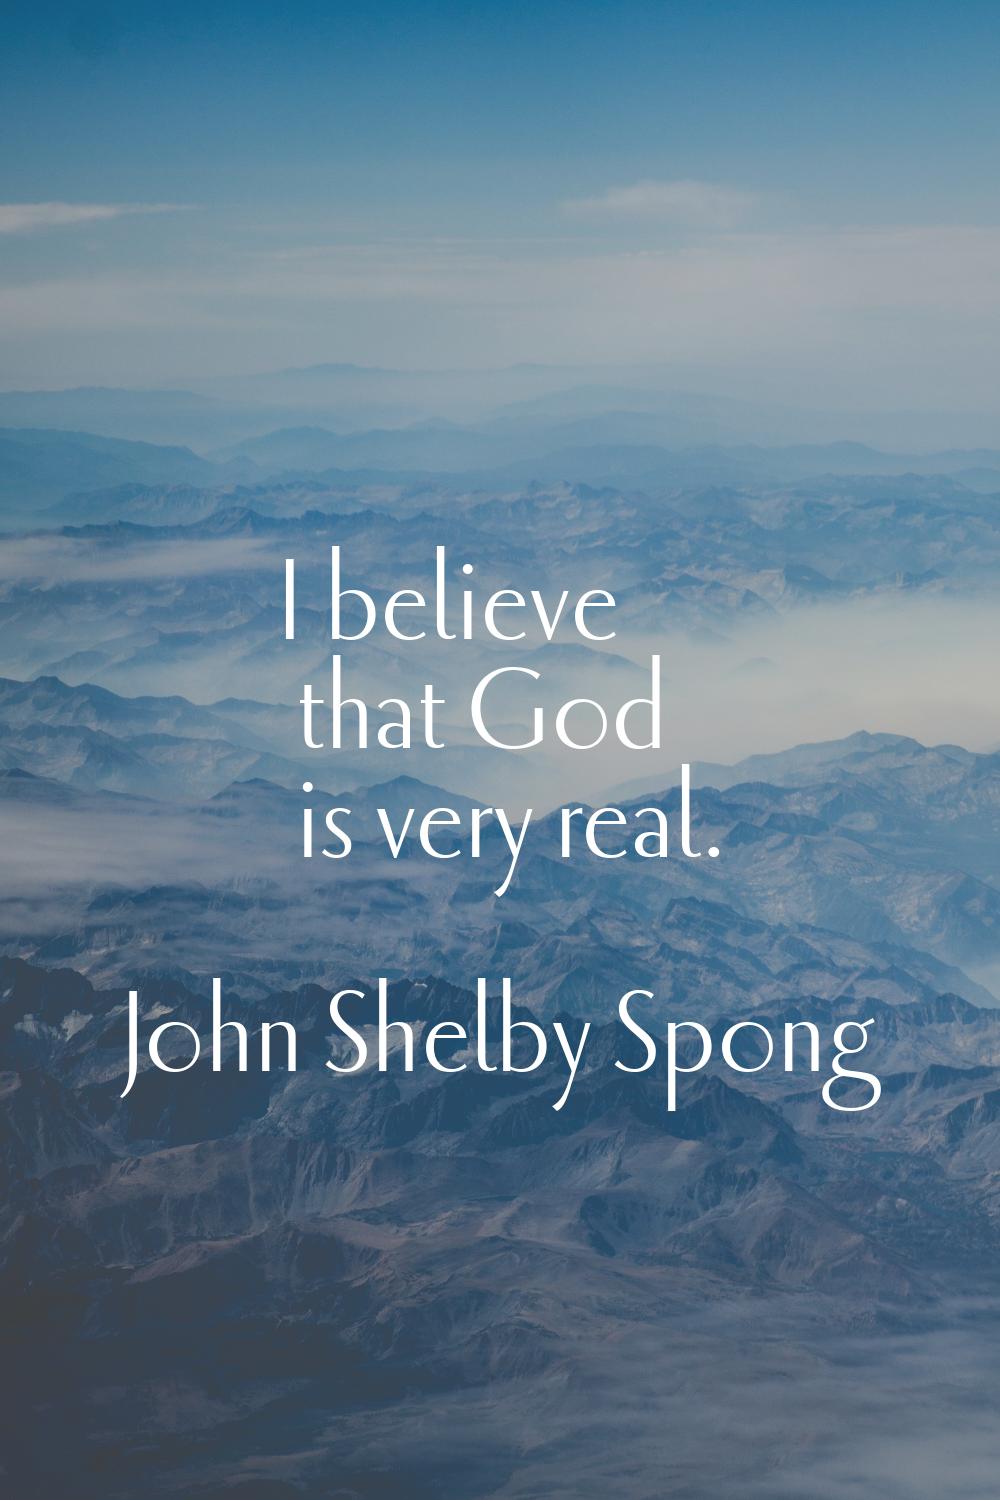 I believe that God is very real.